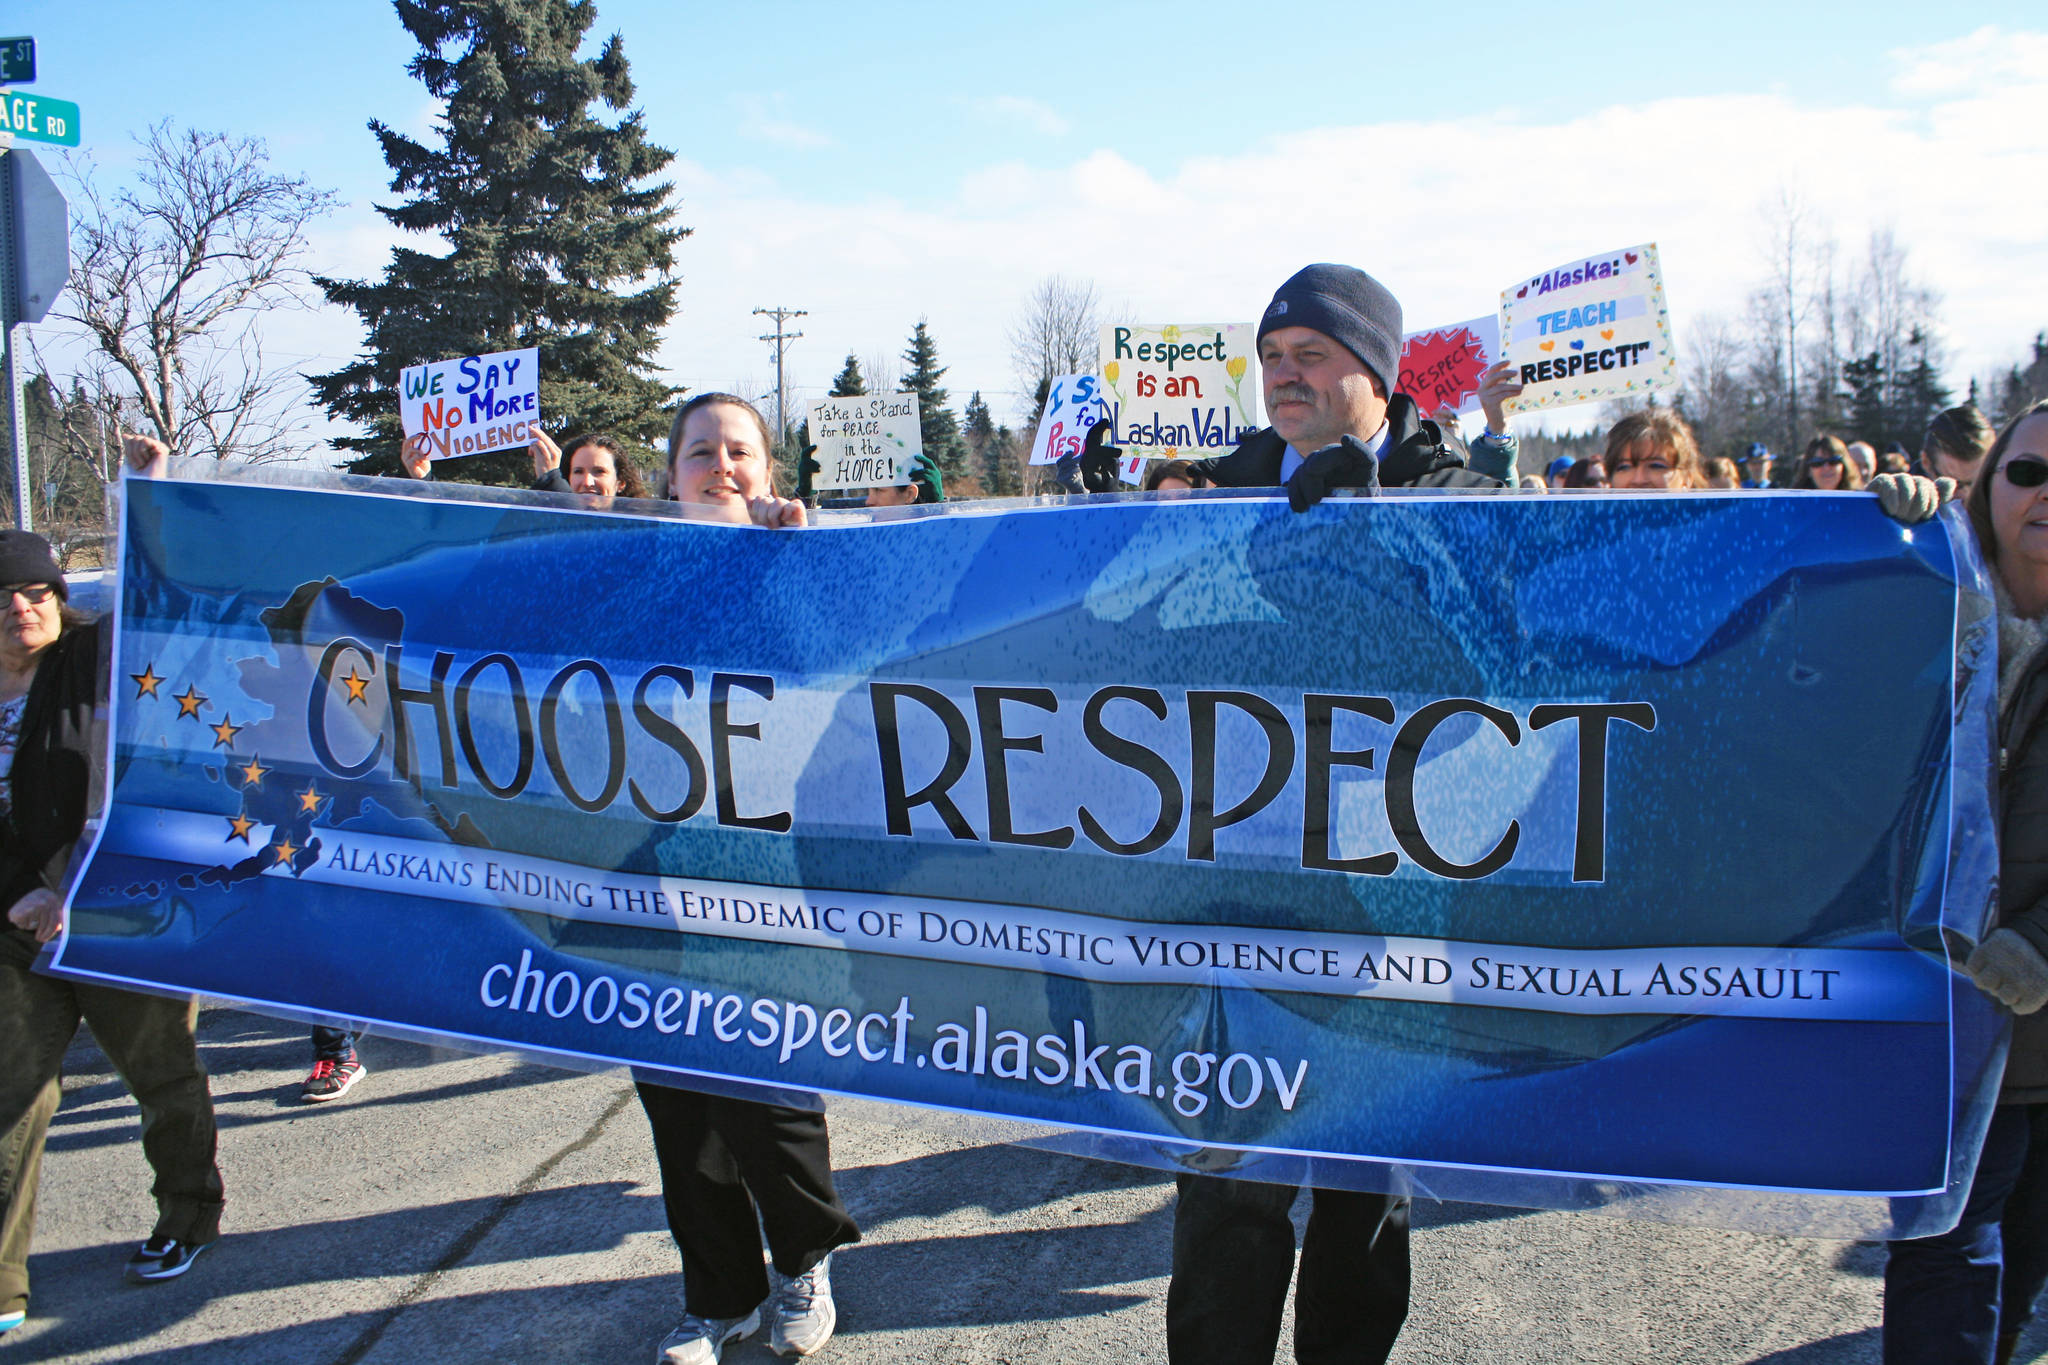 Marchers hold a banner promoting respect during the Alaskans Choose Respect Awareness Event, hosted by the LeeShore Center on March 28. (Photo by Erin Thompson/Peninsula Clarion)